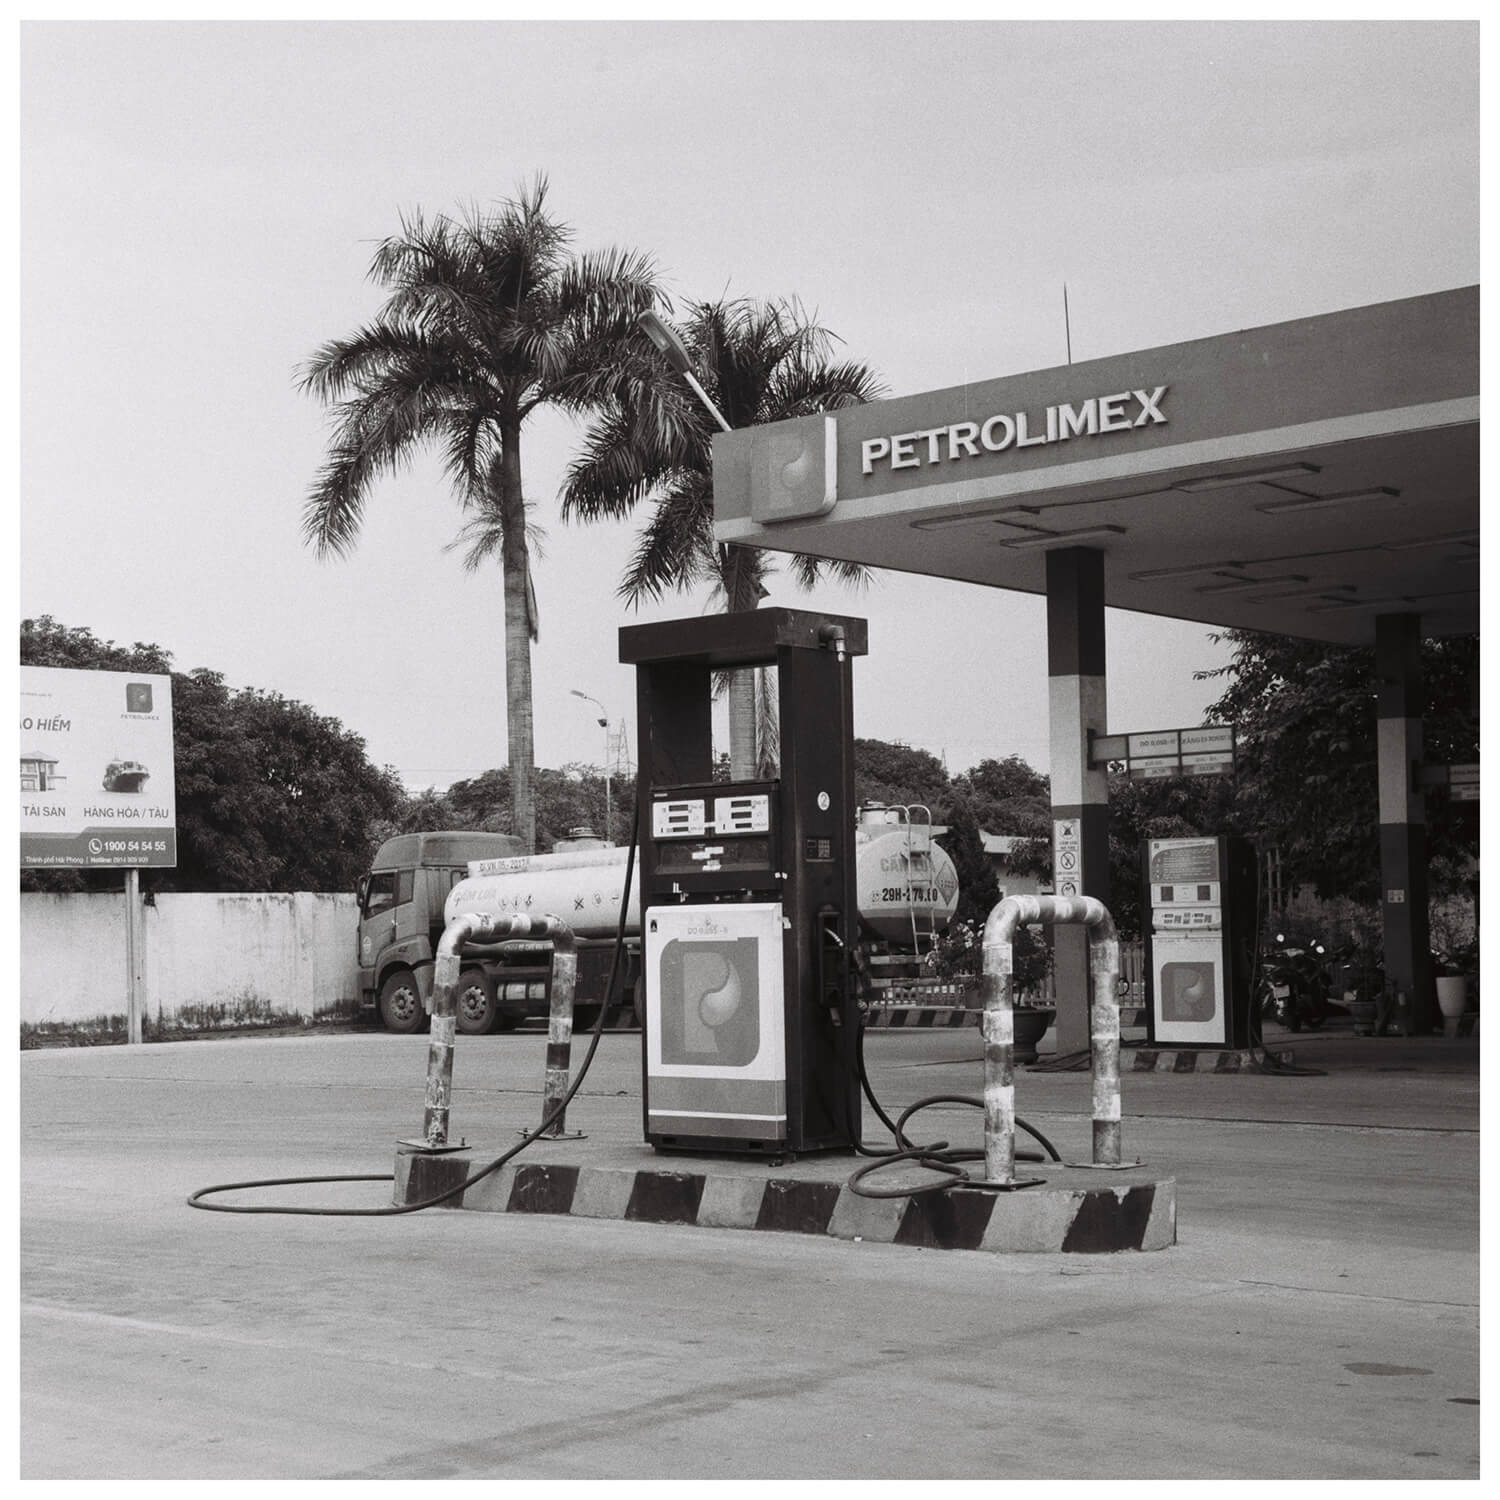 Photo of the gas station on Ilford HP5+ @1600 using Yashica Mat medium format film camera.